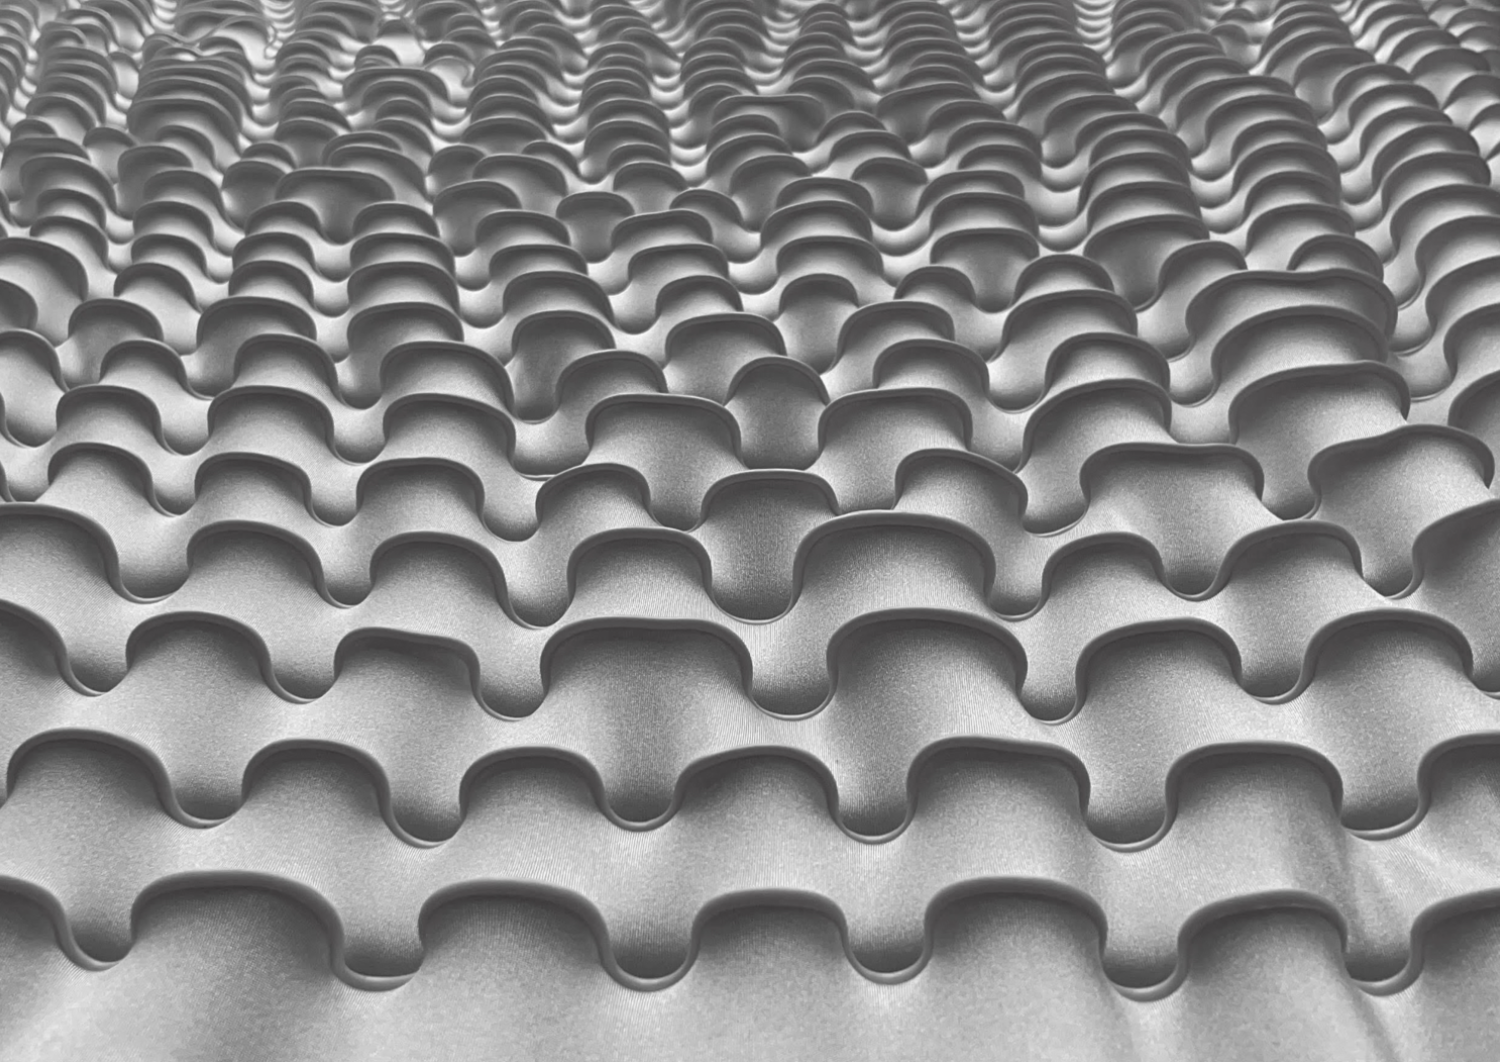 Undulating lines on prestretched textile